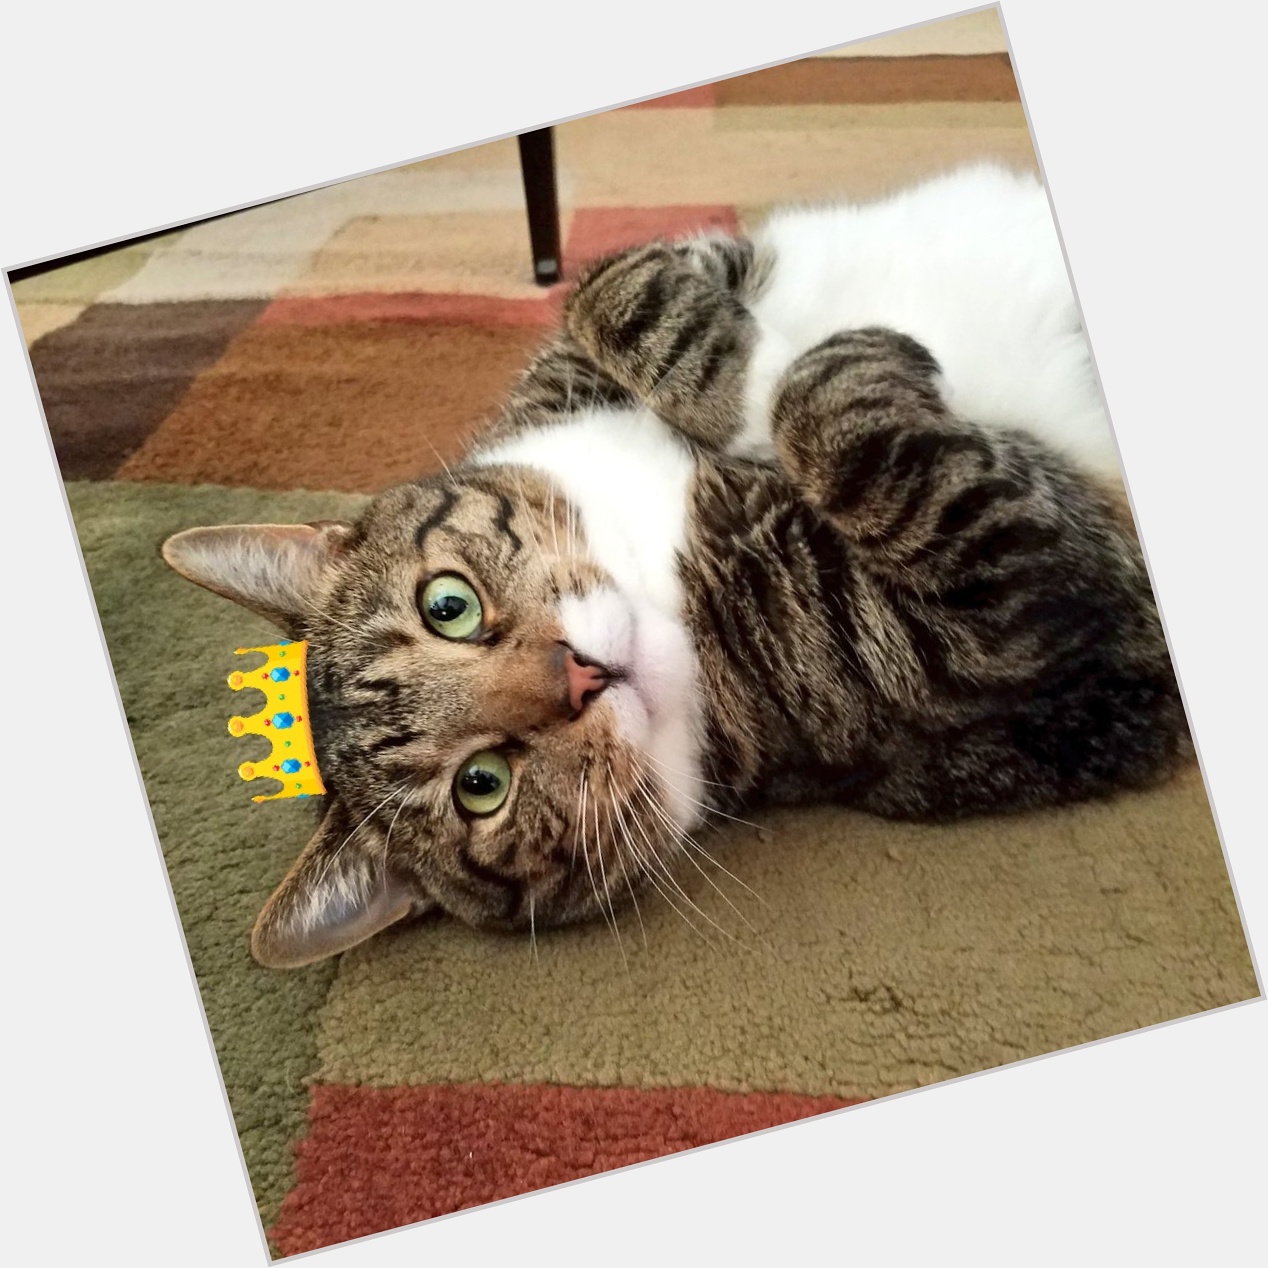 Happy birthday, Walter! You are a prince amongst felines today! 